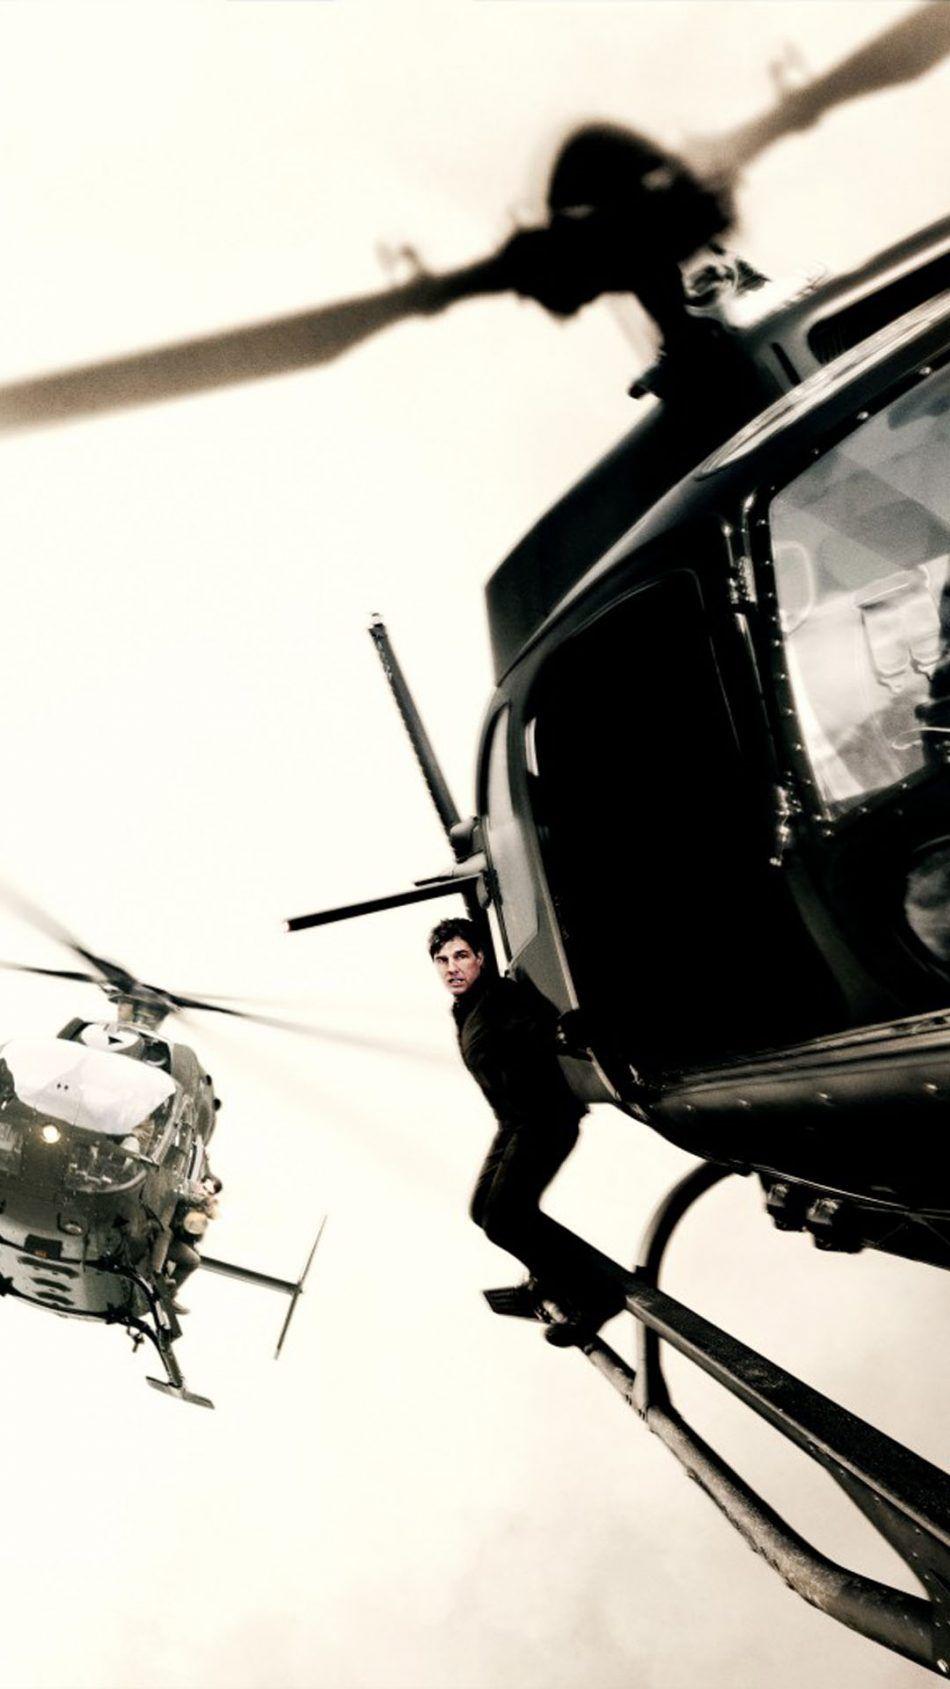 Tom Cruise Chopper Action In Mission Impossible Fallout